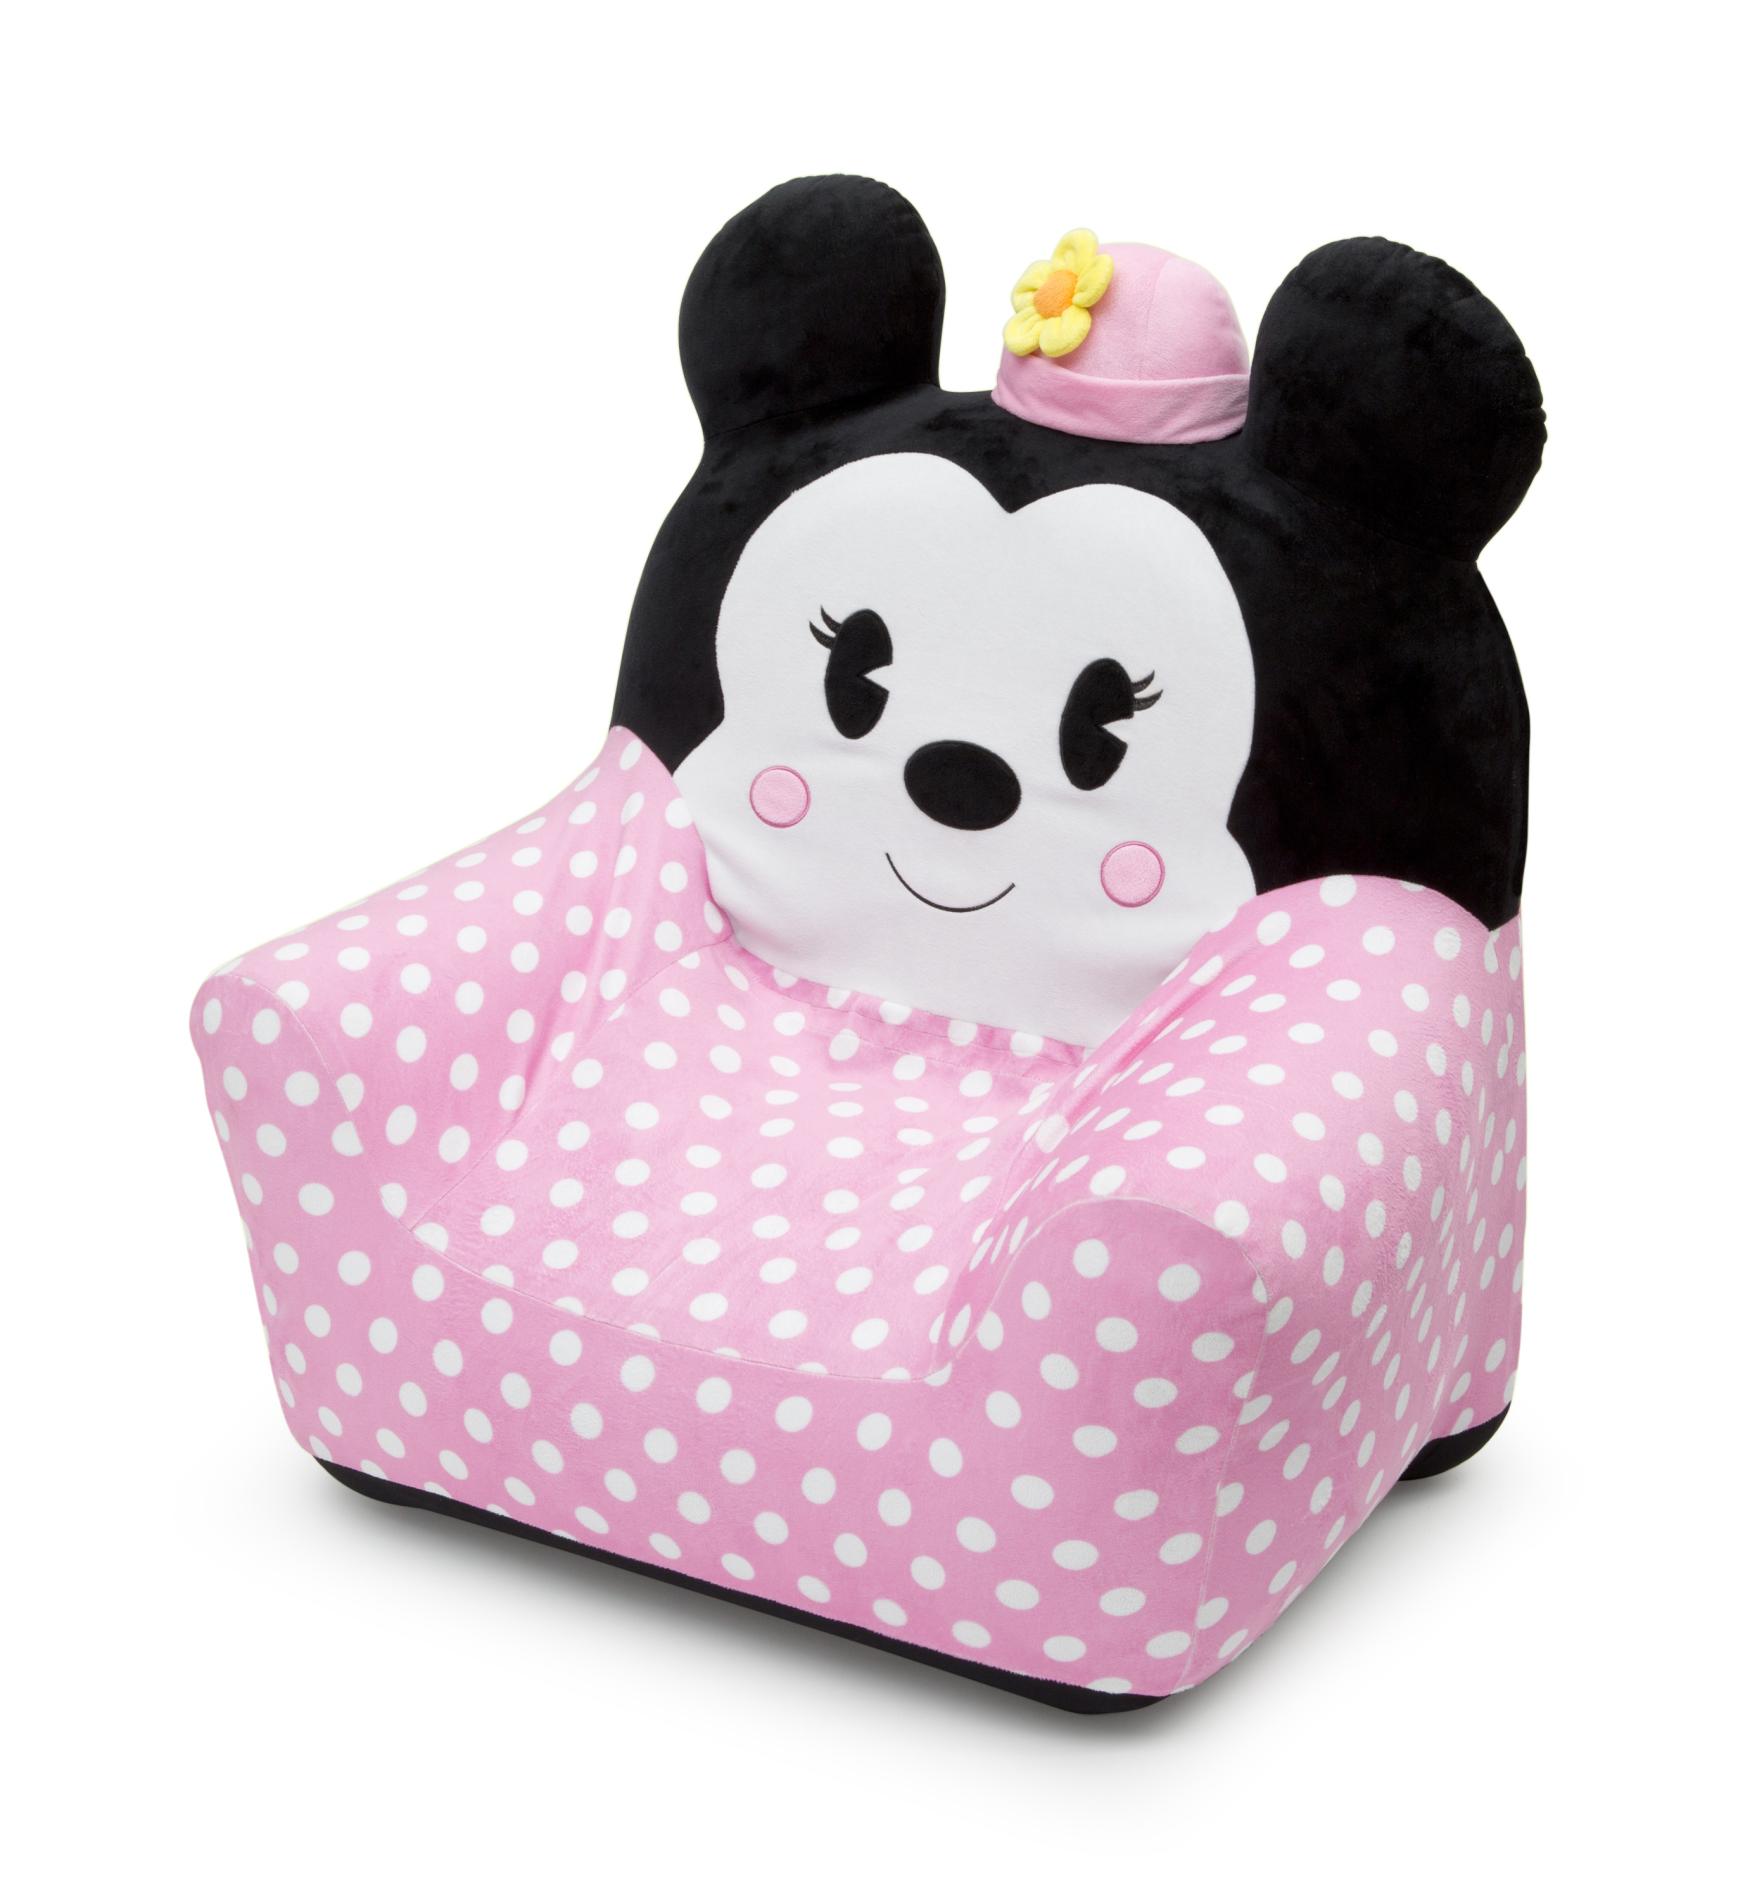 Disney Minnie Mouse Toddler Girl's Chair